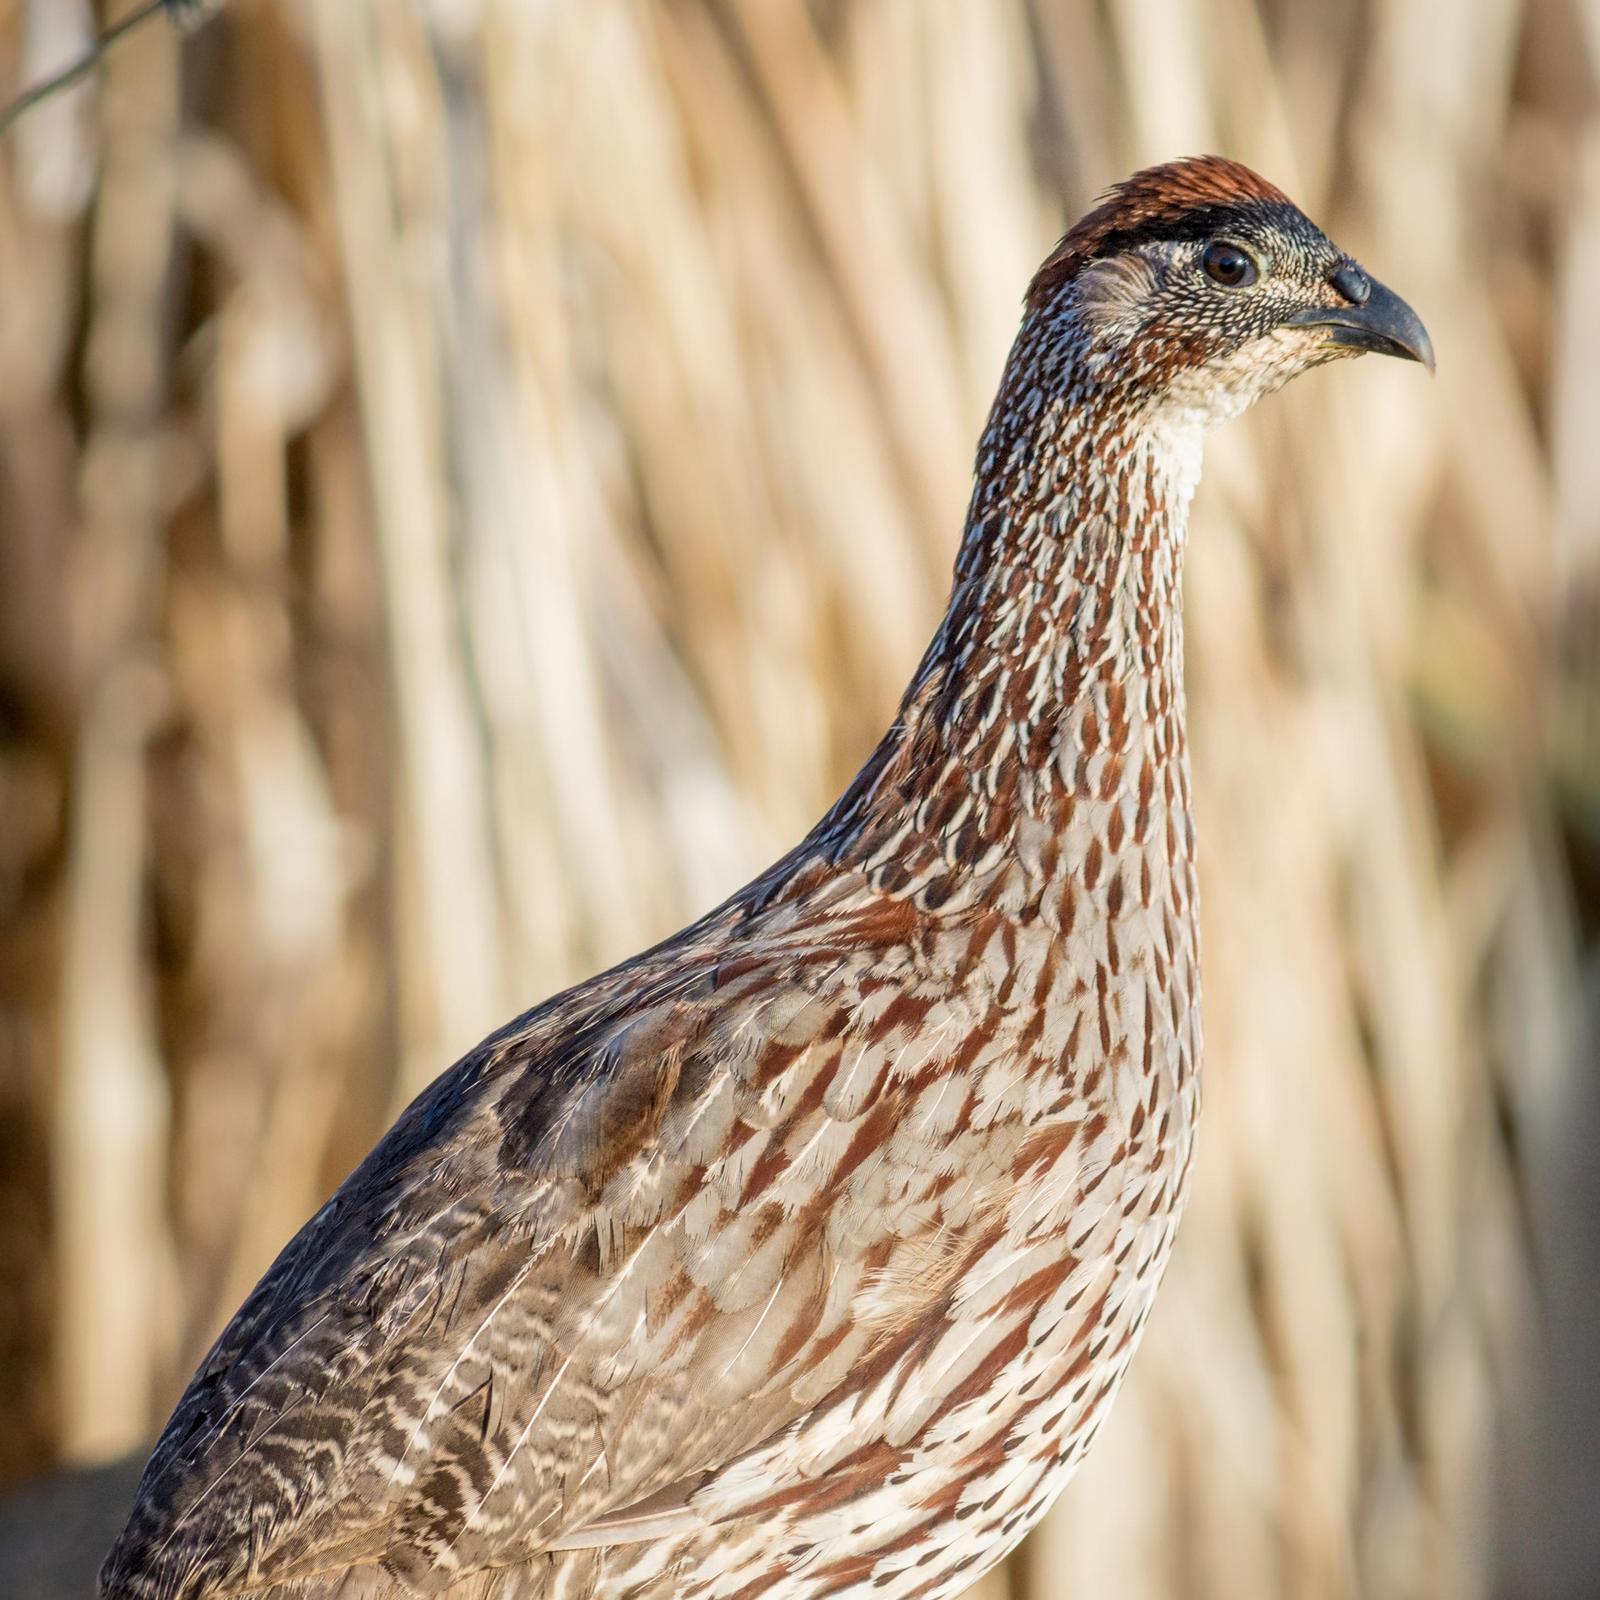 Erckel's Francolin Photo by Jesse Hodges